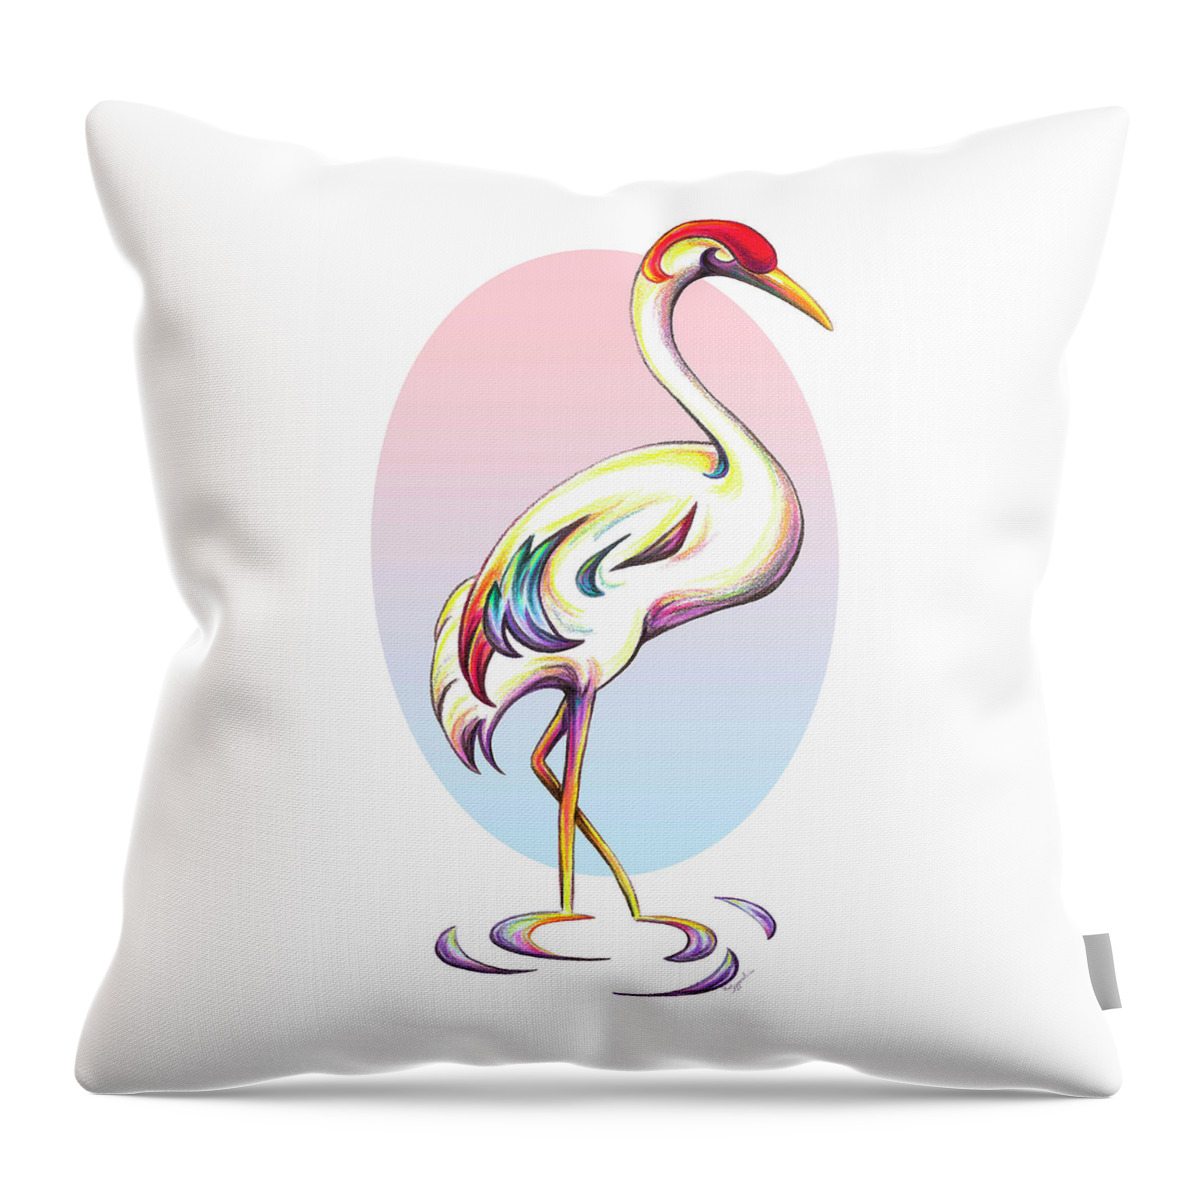 Crane Throw Pillow featuring the drawing Stylized Crane by Sipporah Art and Illustration